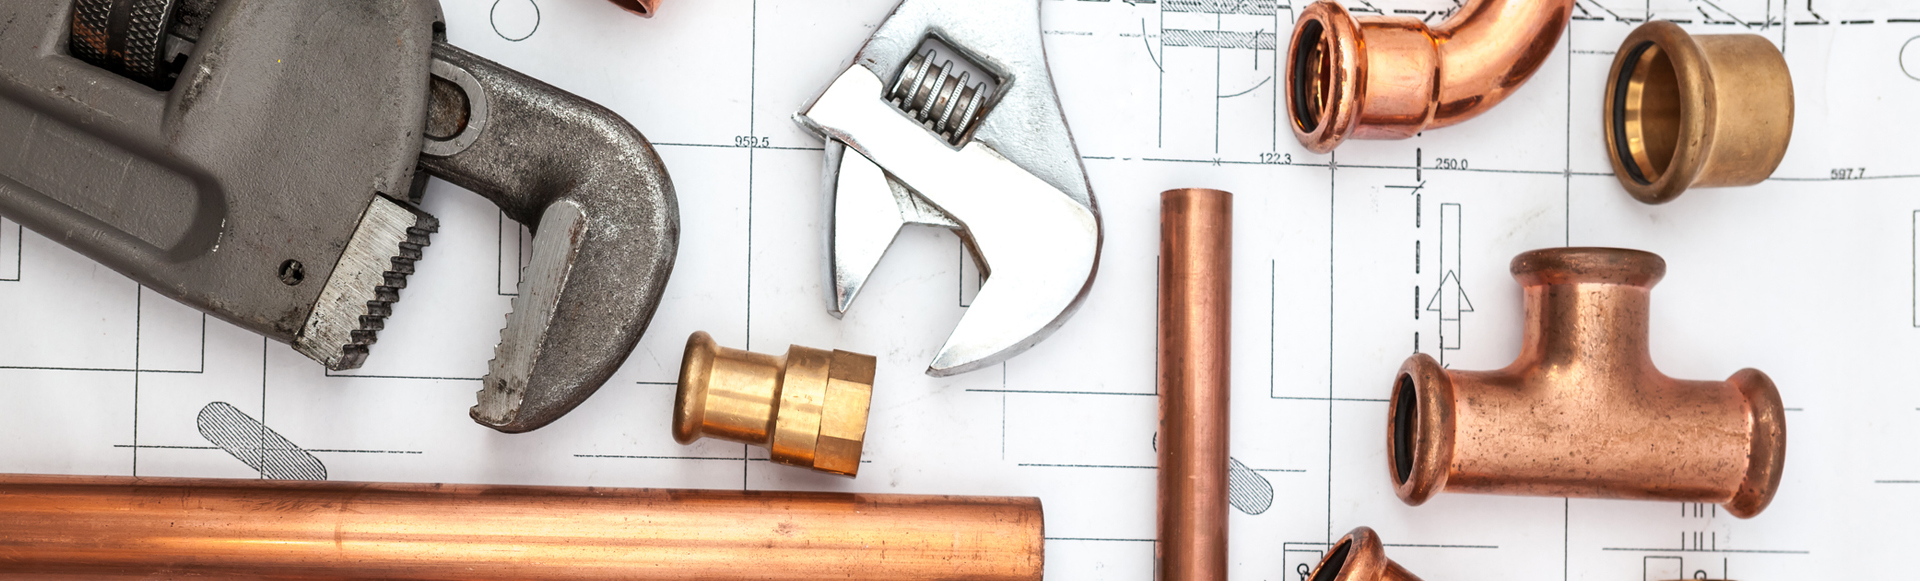 What You Need to Know About Lead and Copper Water Lines